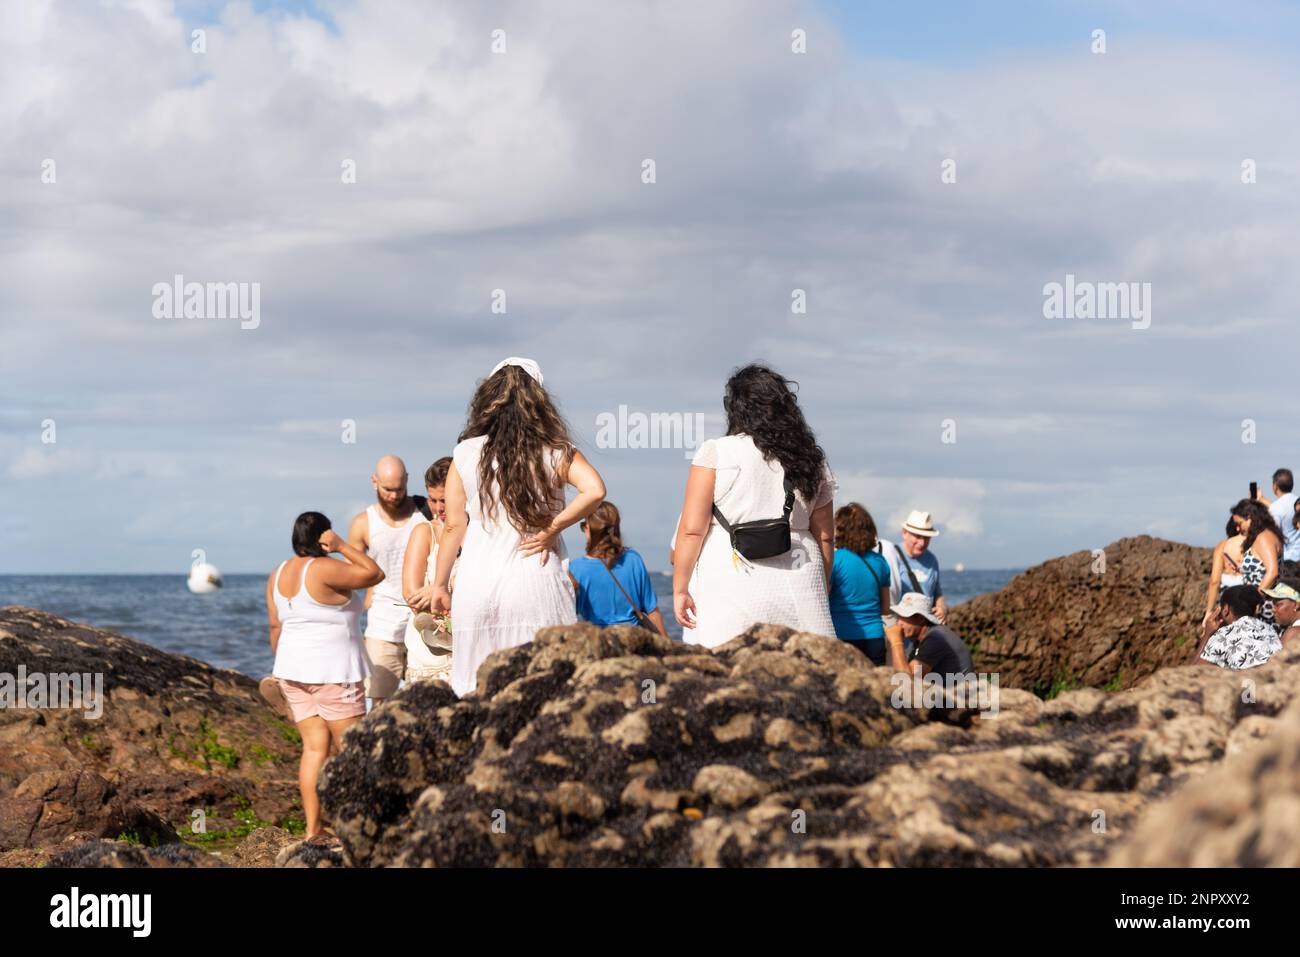 Salvador, Bahia, Brazil - February 02, 2023: People are seen on top of the rocks at Rio Vermelho beach, offering gifts to Yemanja, in Salvador, Bahia. Stock Photo